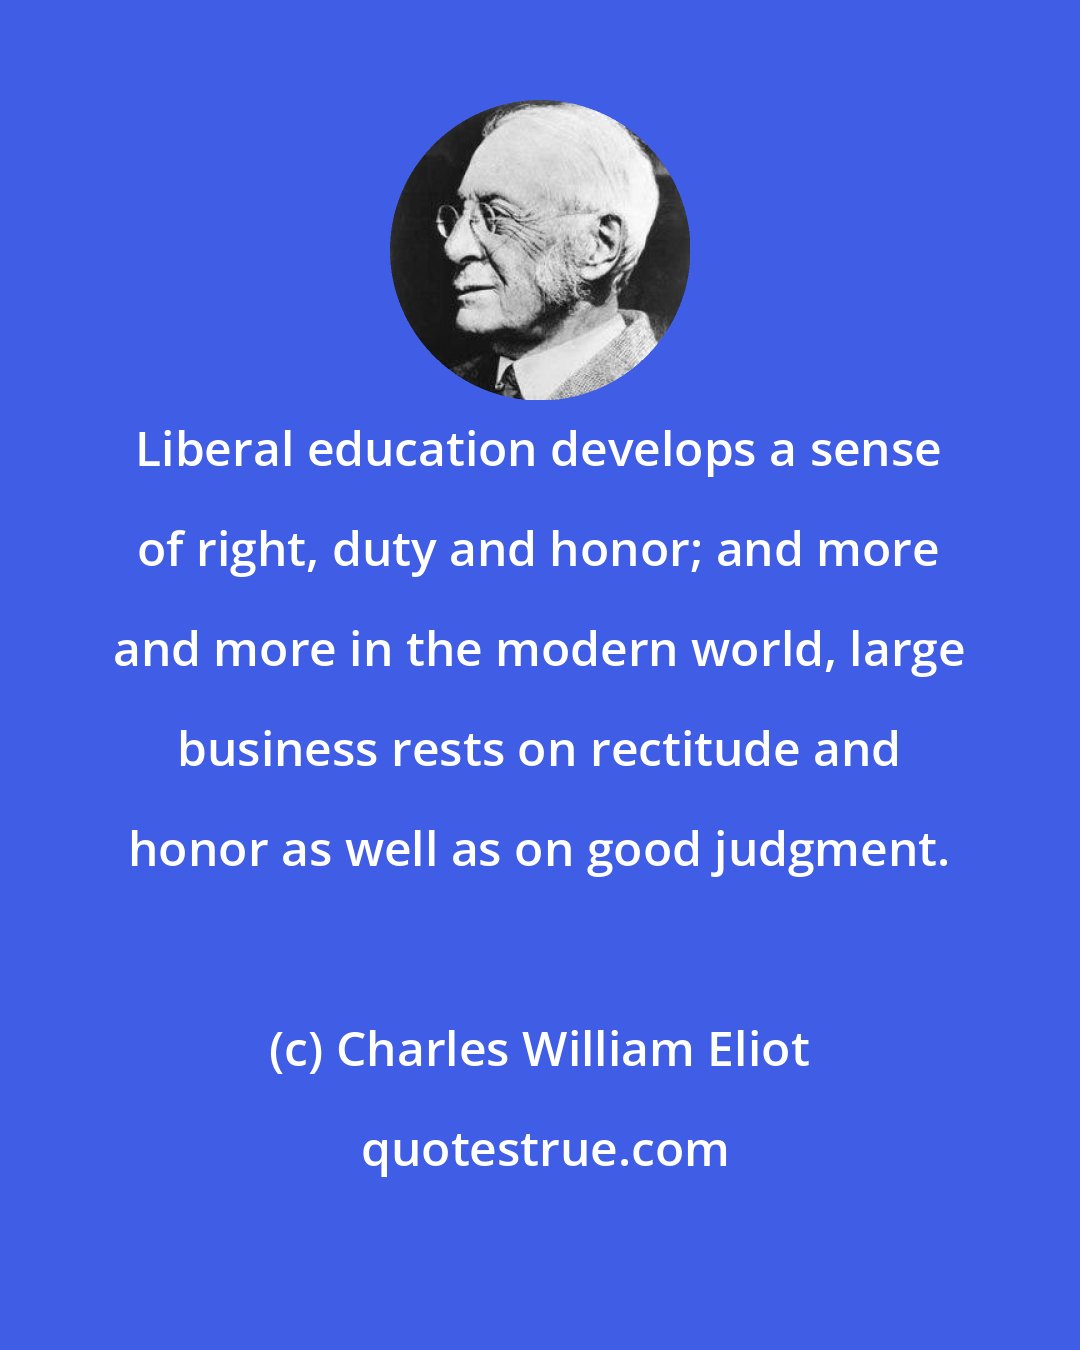 Charles William Eliot: Liberal education develops a sense of right, duty and honor; and more and more in the modern world, large business rests on rectitude and honor as well as on good judgment.